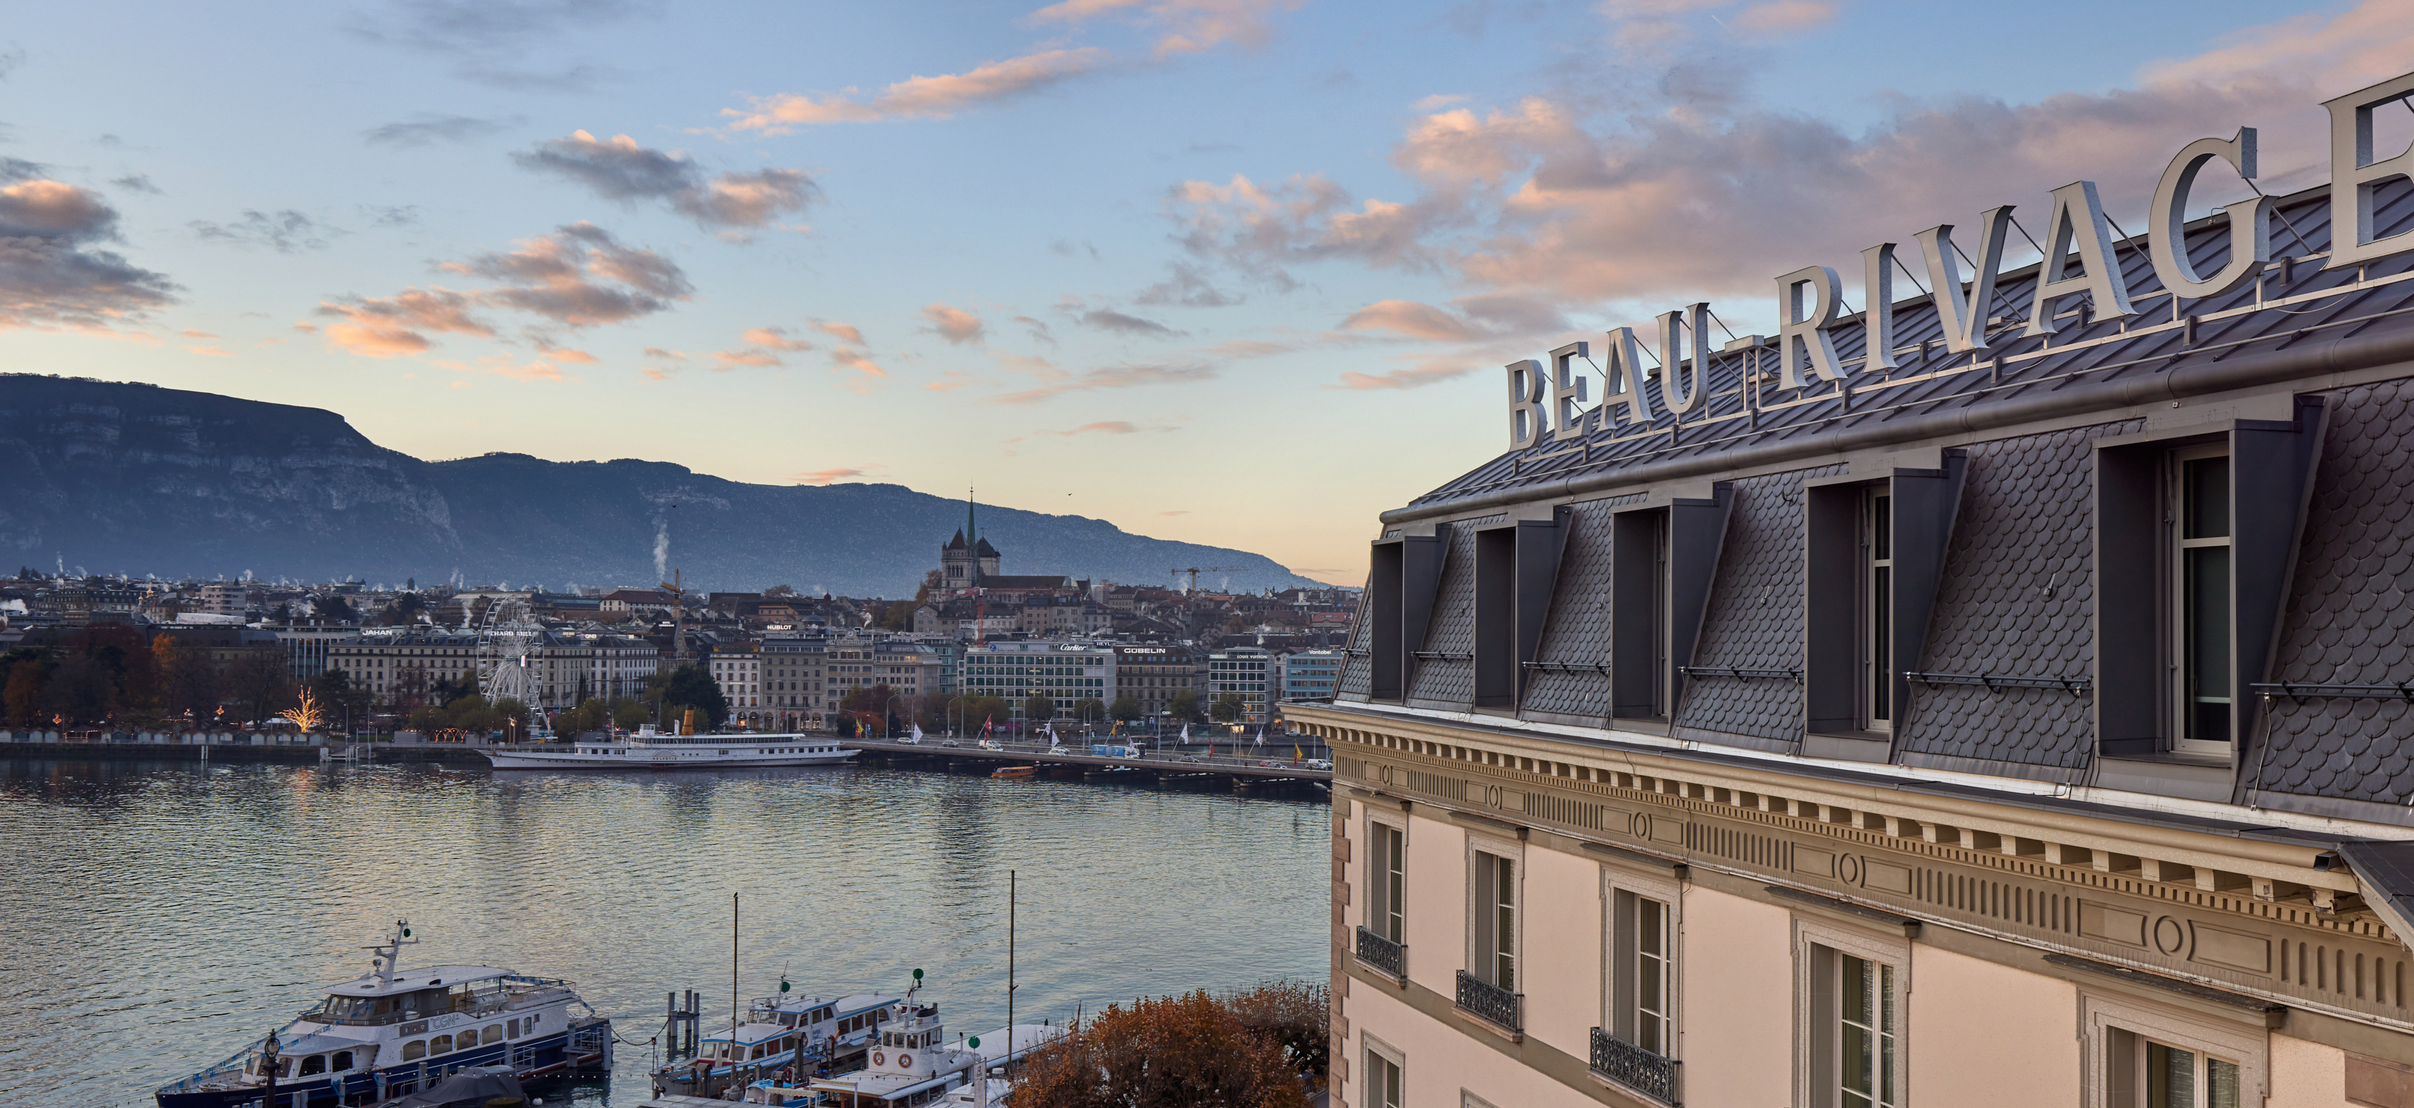 French Wine Driving Tour - Beau Rivage Geneva